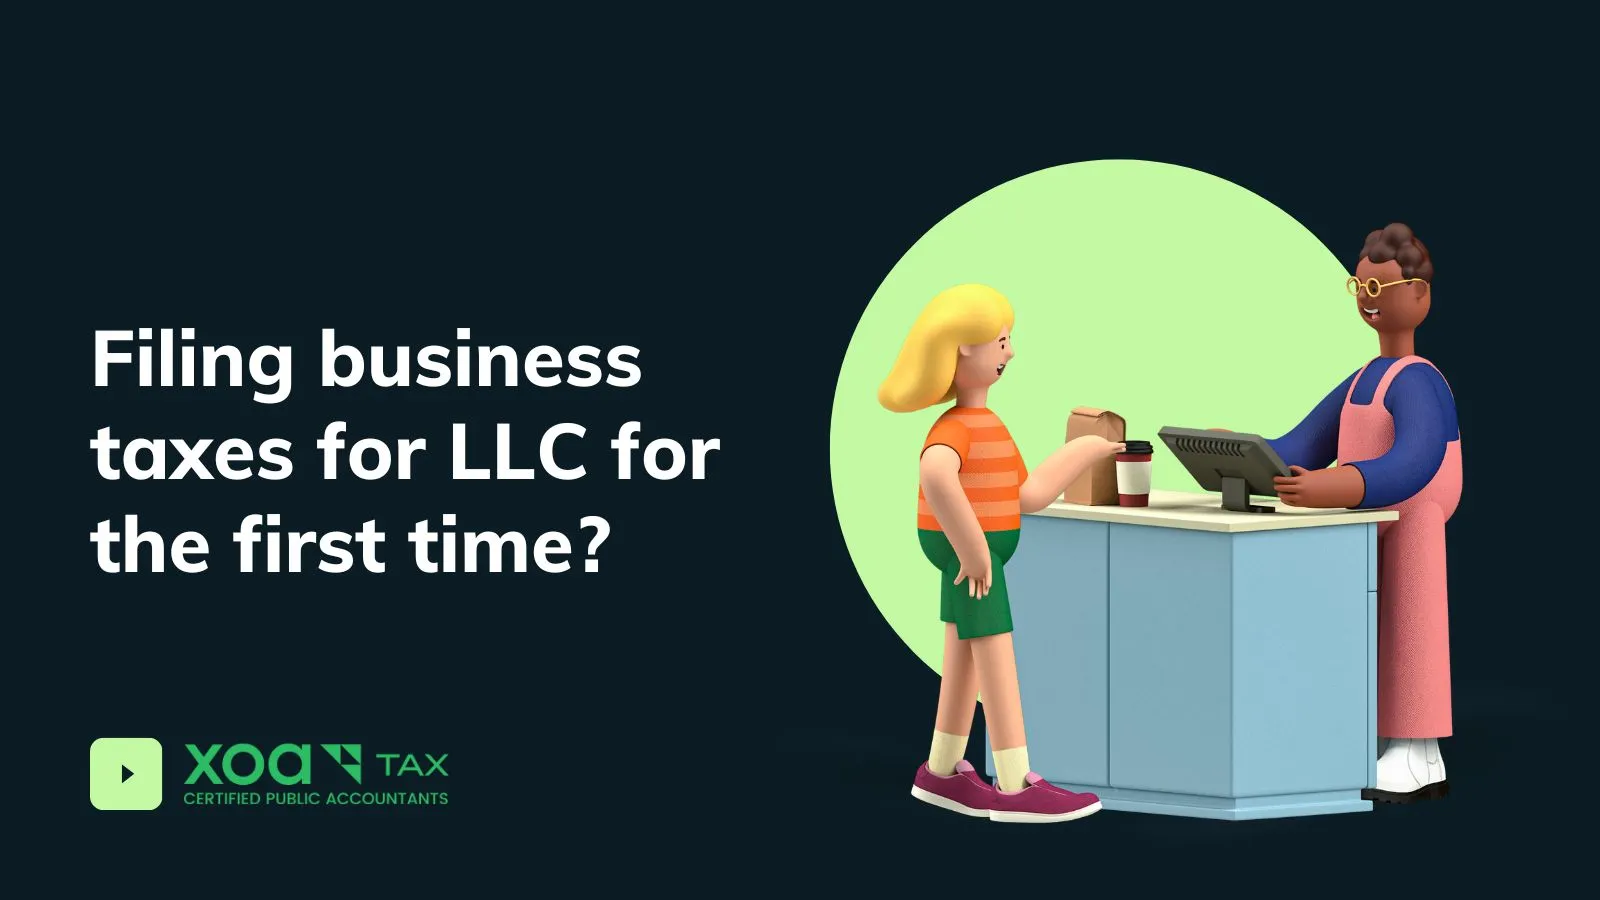 A comprehensive guide for filing business taxes for LLC for the first time